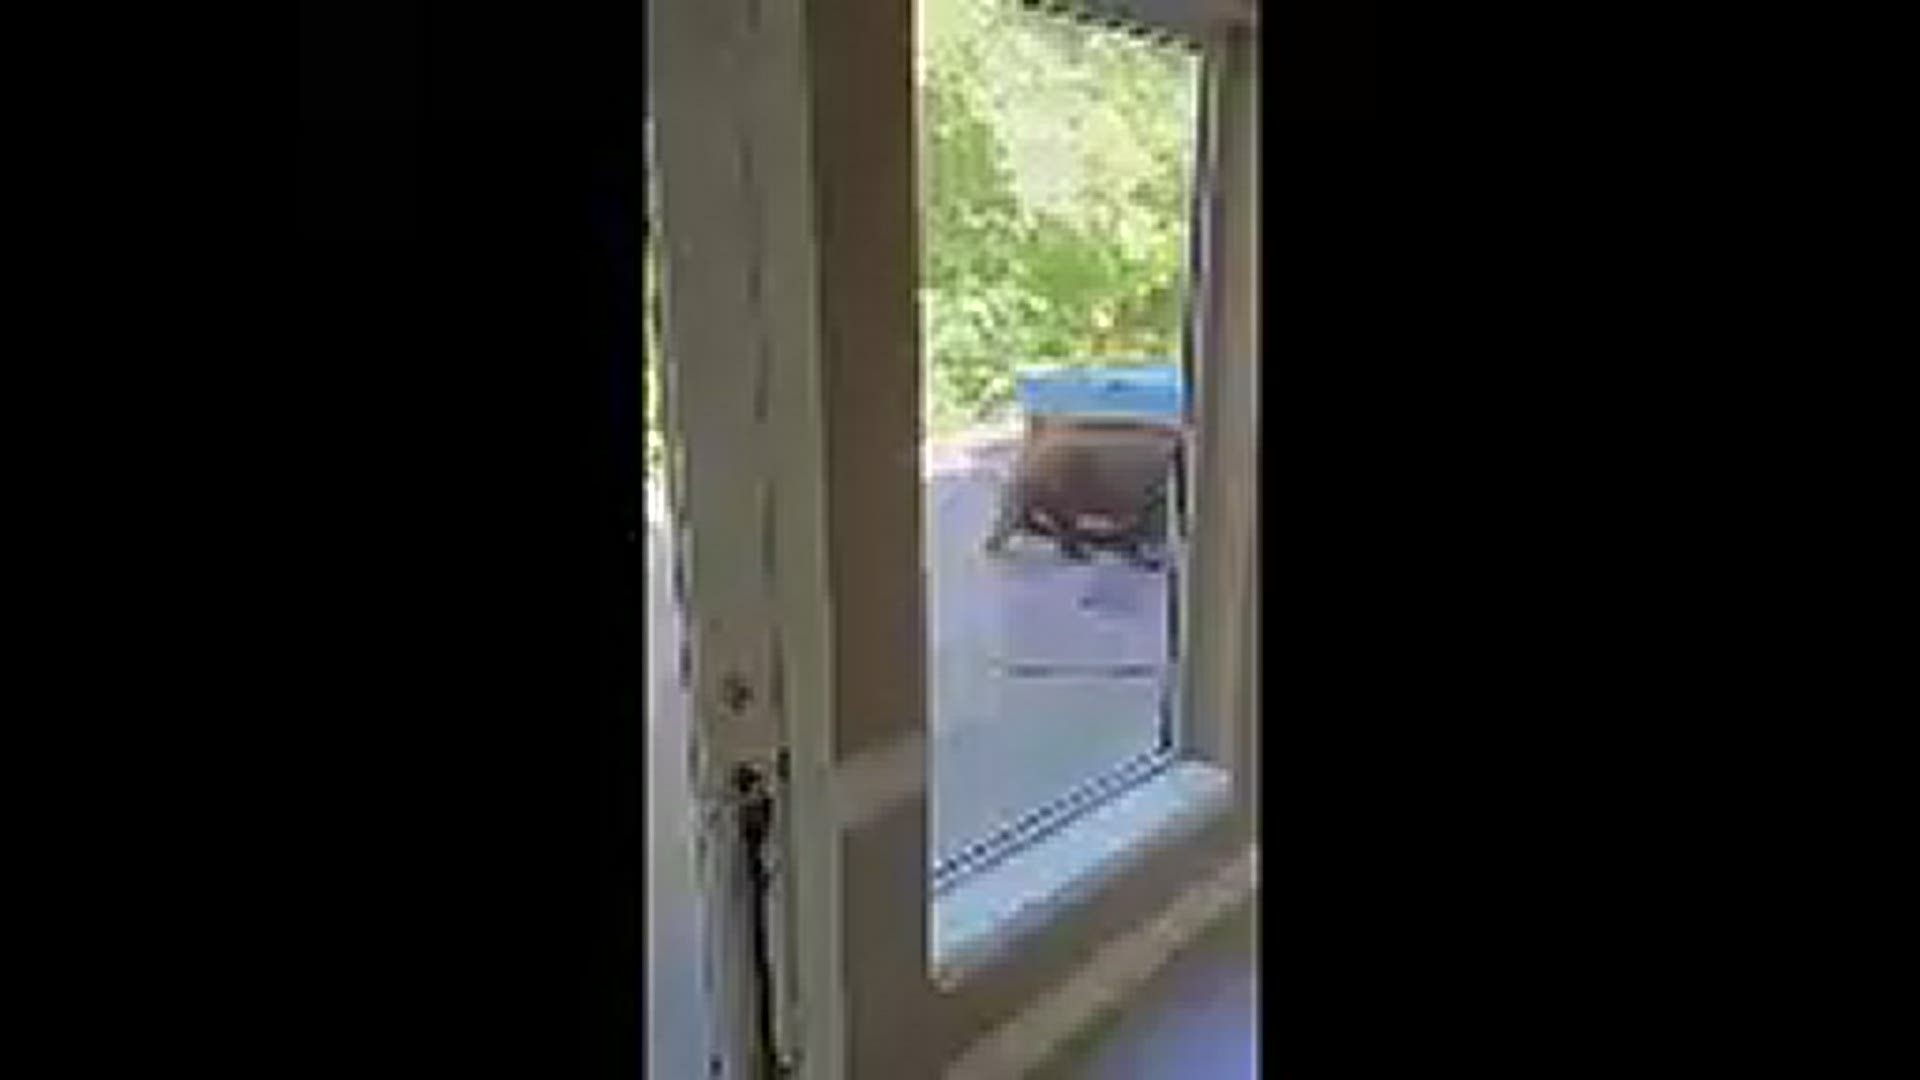 The Monroe County Sheriff’s Department is warning residents about a bear in the area of Chantilly Village Thursday morning. Video courtesy: Elizabeth Eggemeyer.